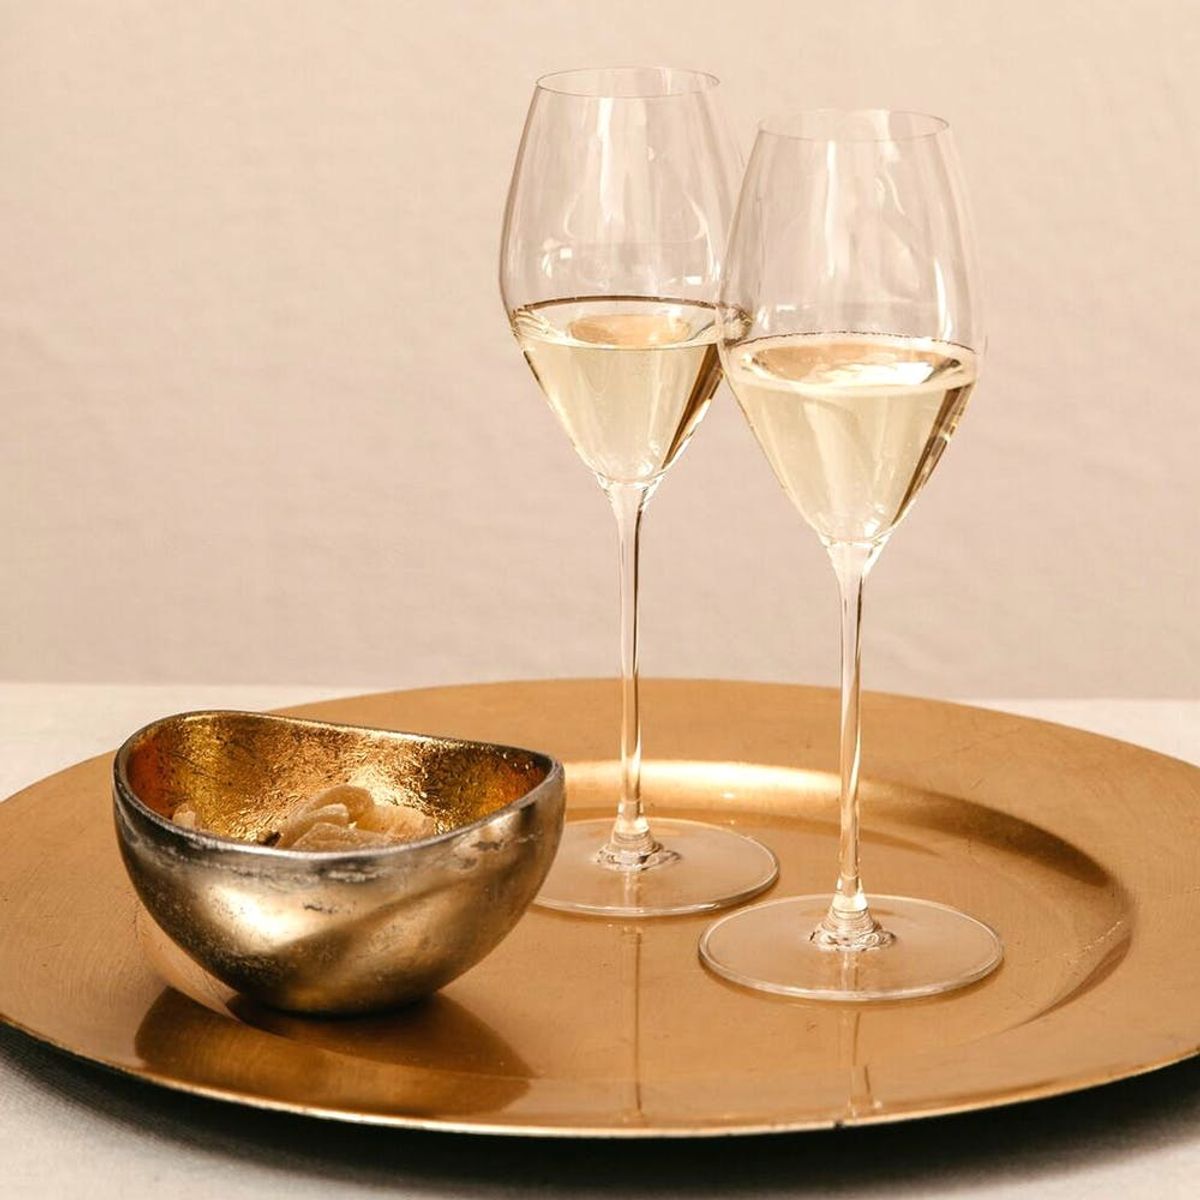 This Glass Will Make Your Champagne Taste Better (No, Really!)